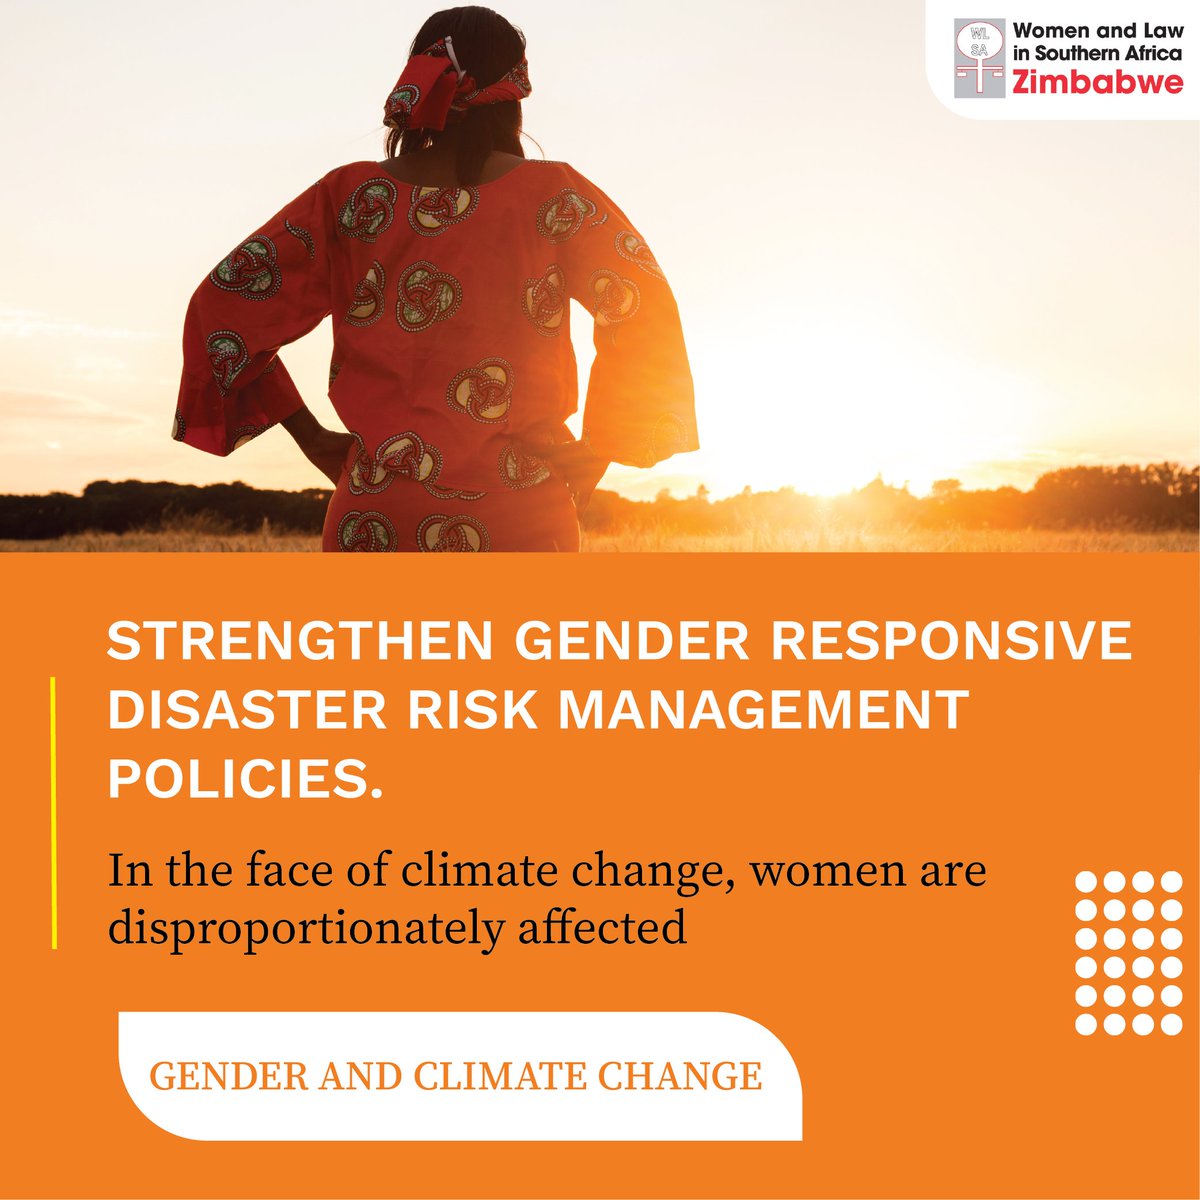 📣Climate change is real, and its impact on women is devastating. ➡️Implement gender-responsive risk management systems ➡️Strengthen disaster early warning systems ➡️Involve women in #DRM decision-making structures